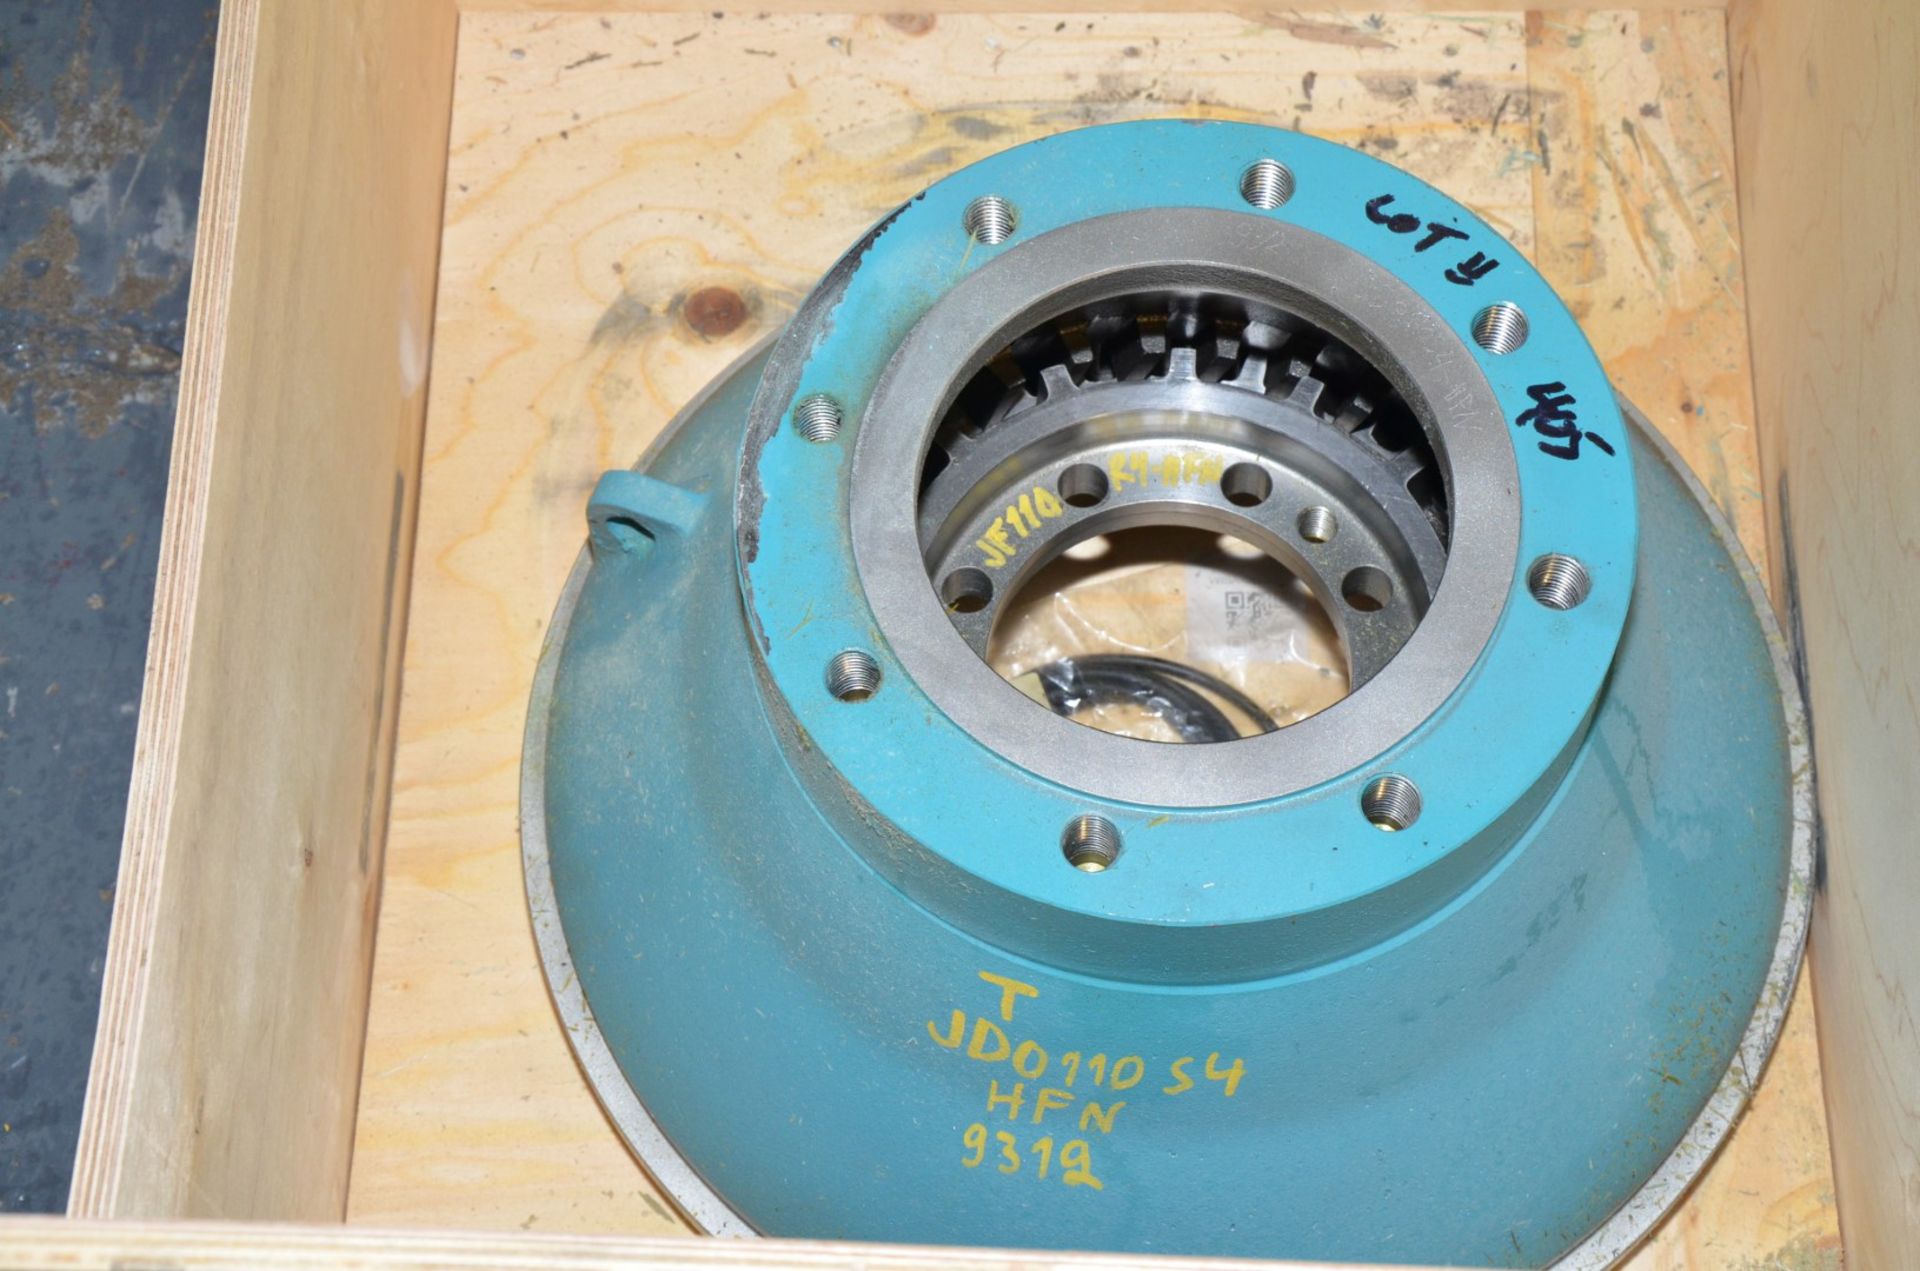 METSO DF-0 SPARE DEFLAKER ROTOR [RIGGING FEE FOR LOT #405A - $25 USD PLUS APPLICABLE TAXES] - Image 2 of 3